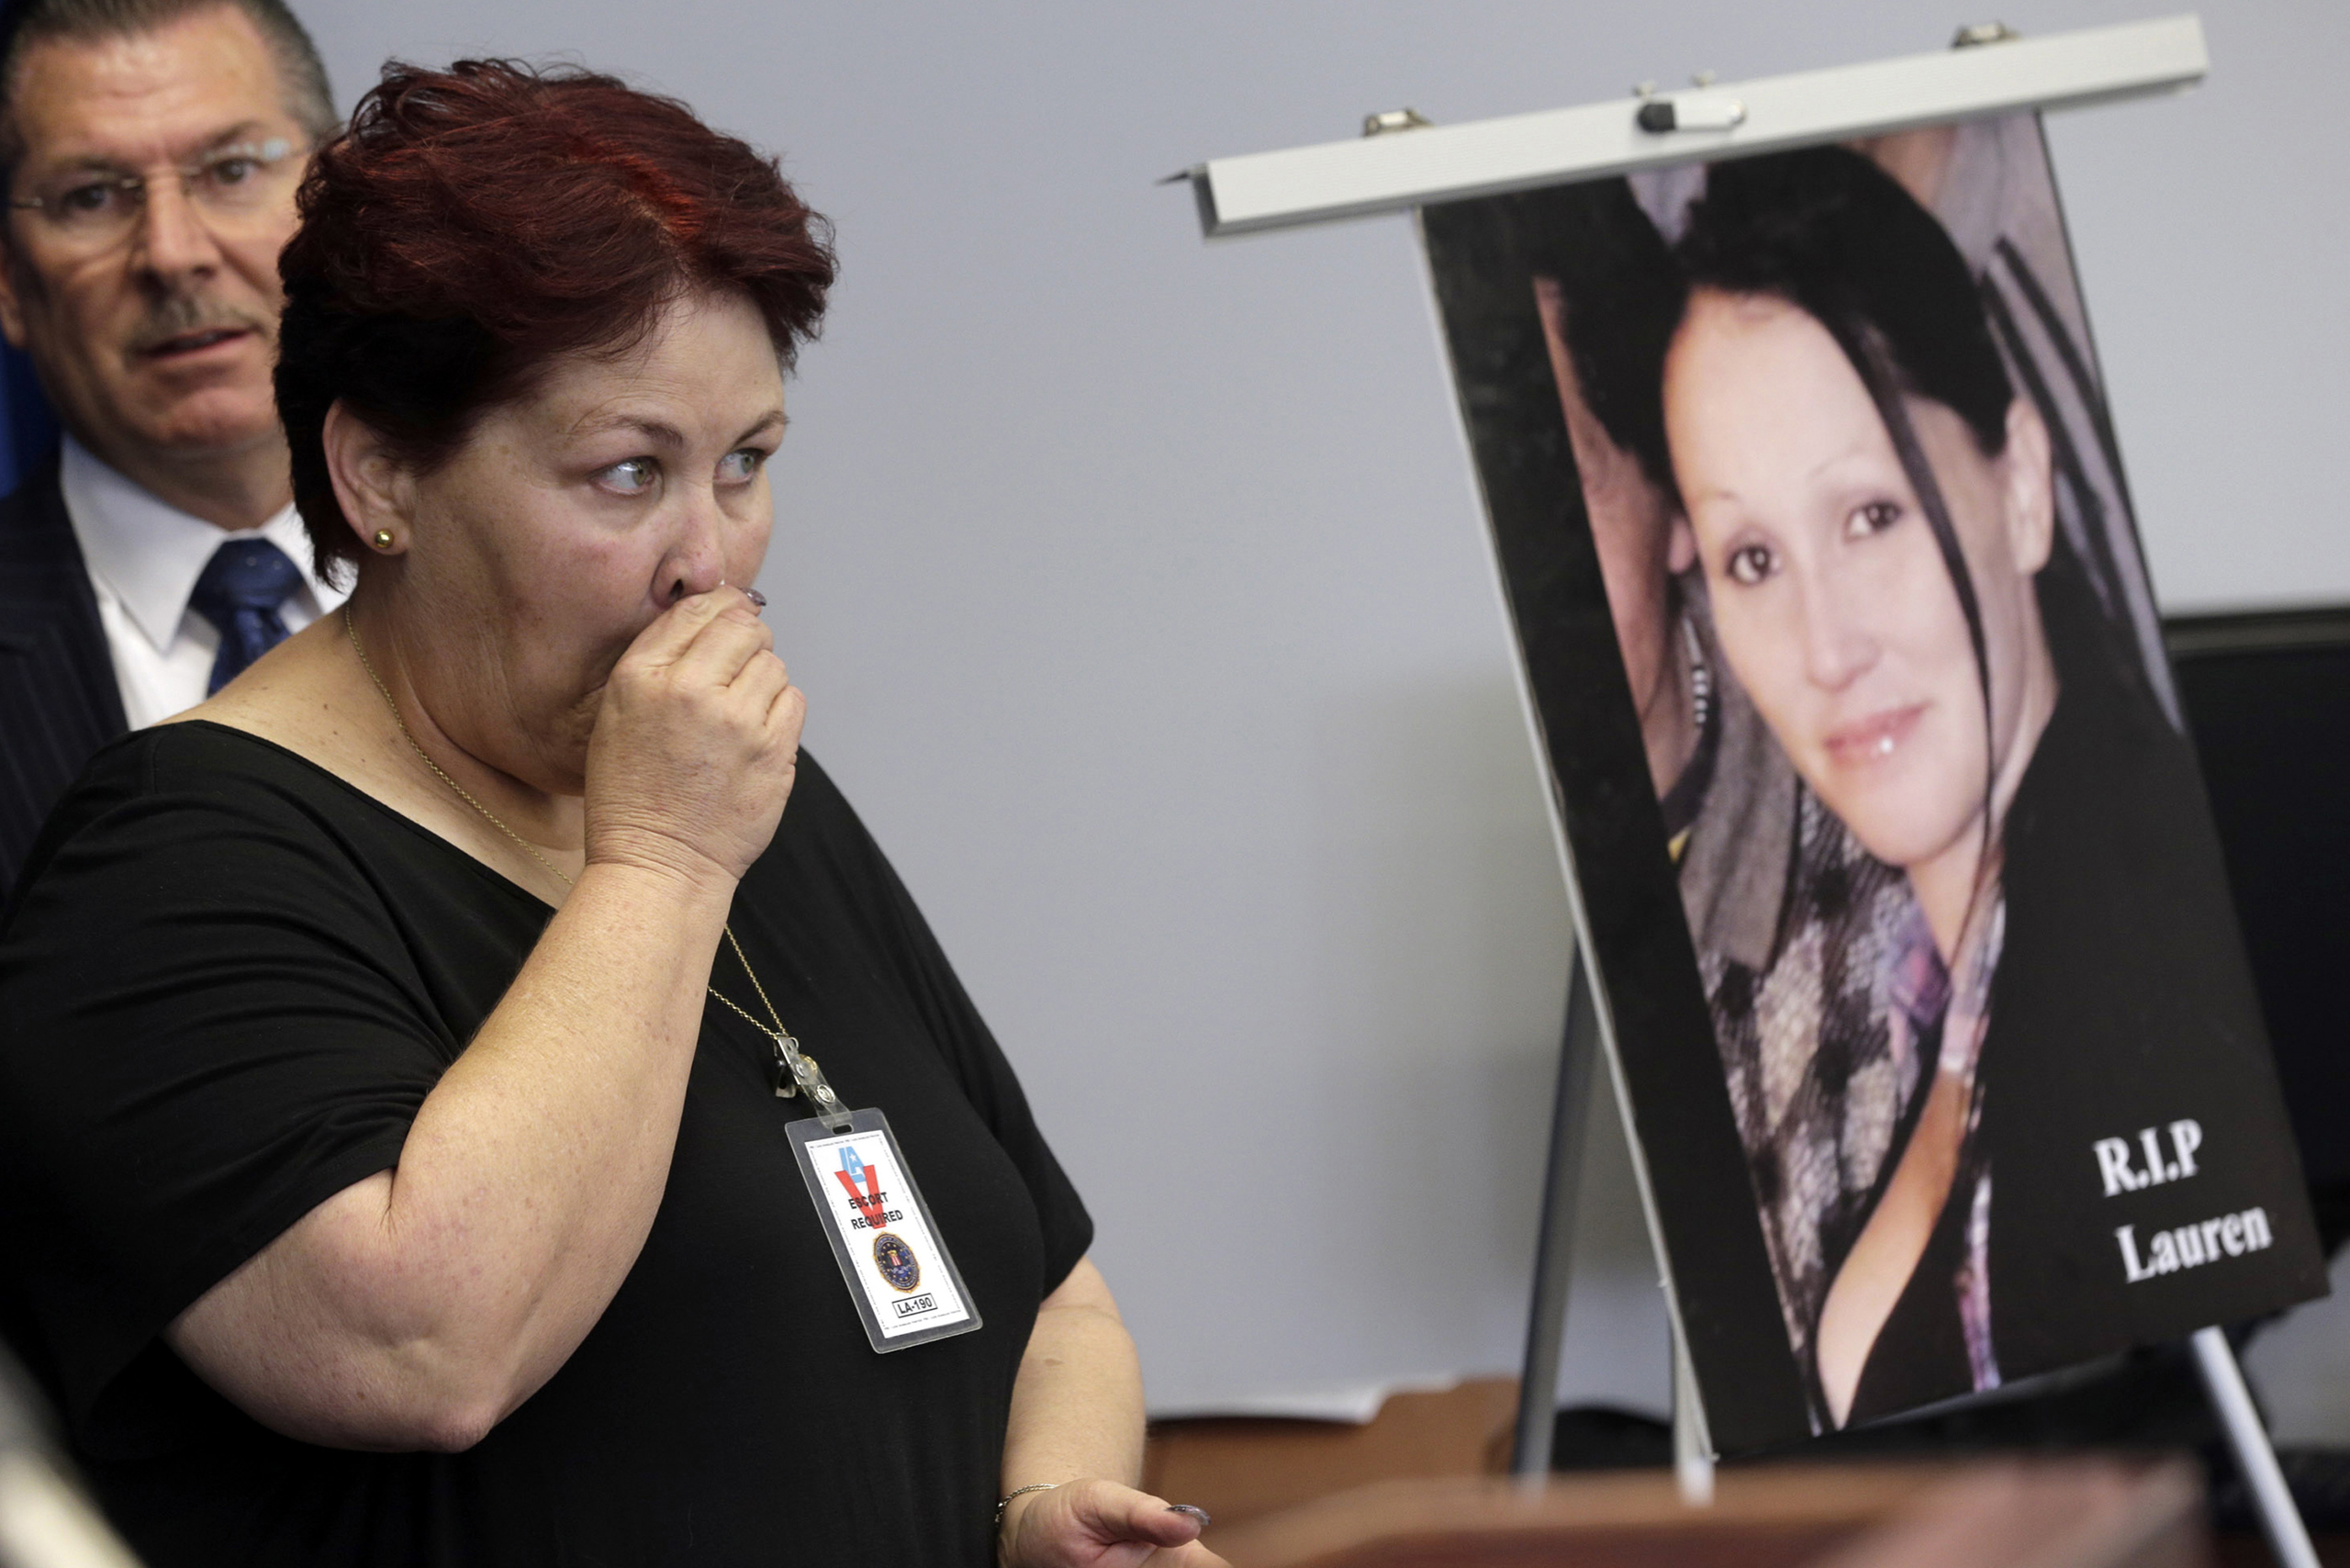 Jerilyn Olguin, mother of murder victim Lauren Elaine Olguin, seen in the photo, appears at a FBI news conference announcing additions to its 10 Most Wanted list, in Los Angeles, May 19, 2016. (Nick Ut—AP)